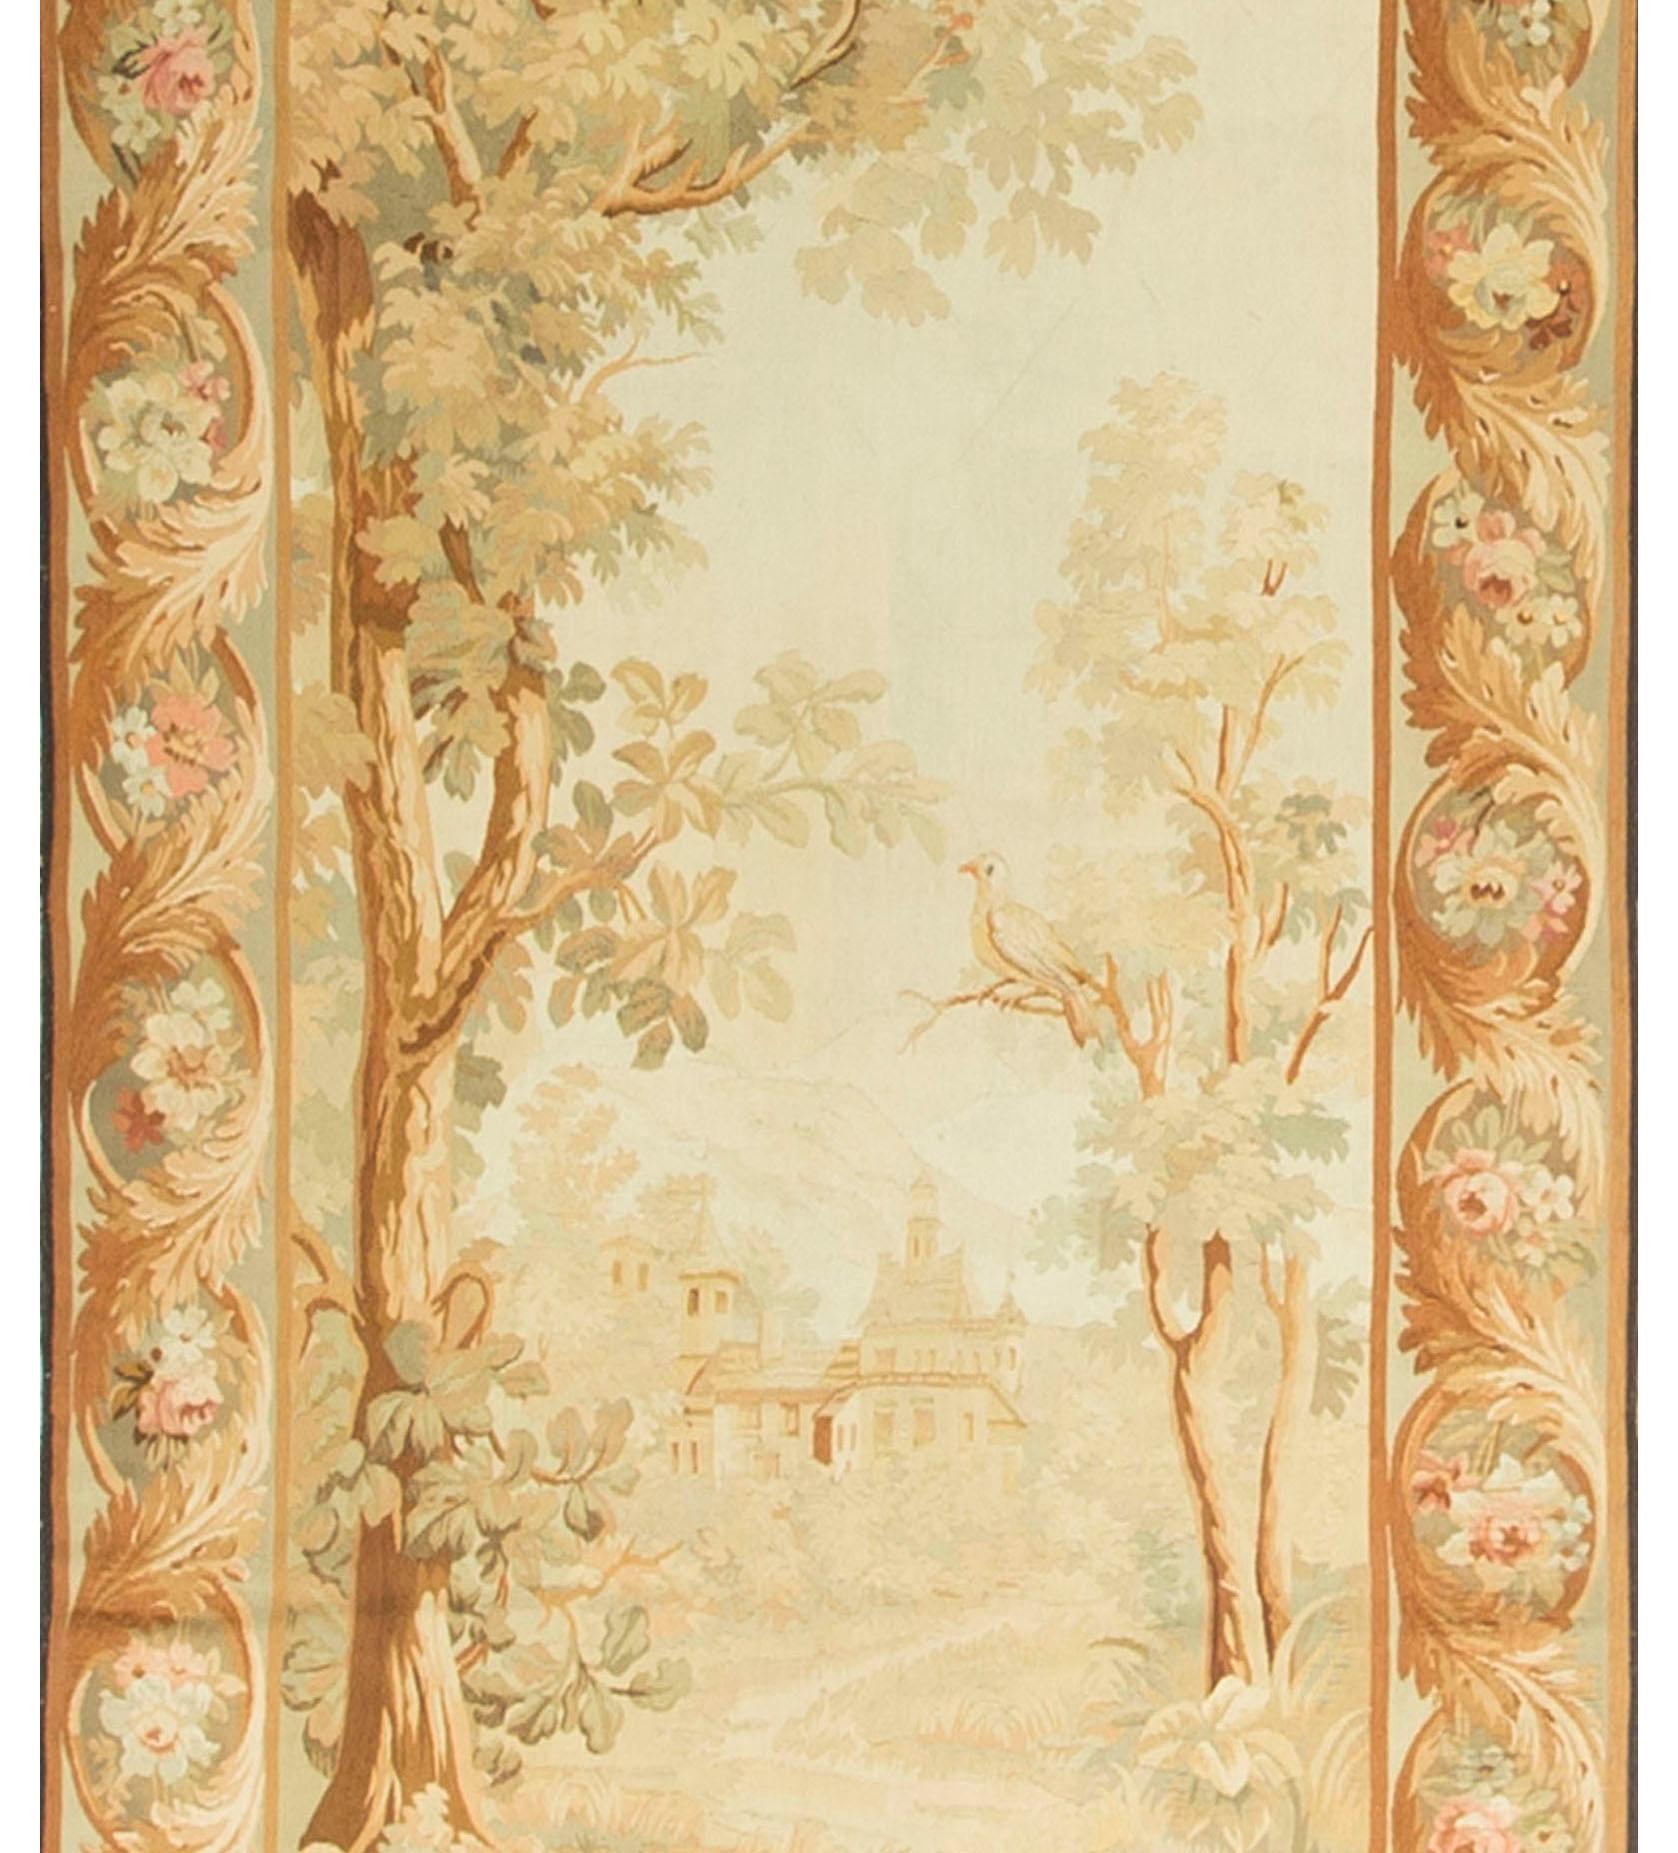 French Aubusson Tapestry, circa 1850 In Good Condition For Sale In Secaucus, NJ